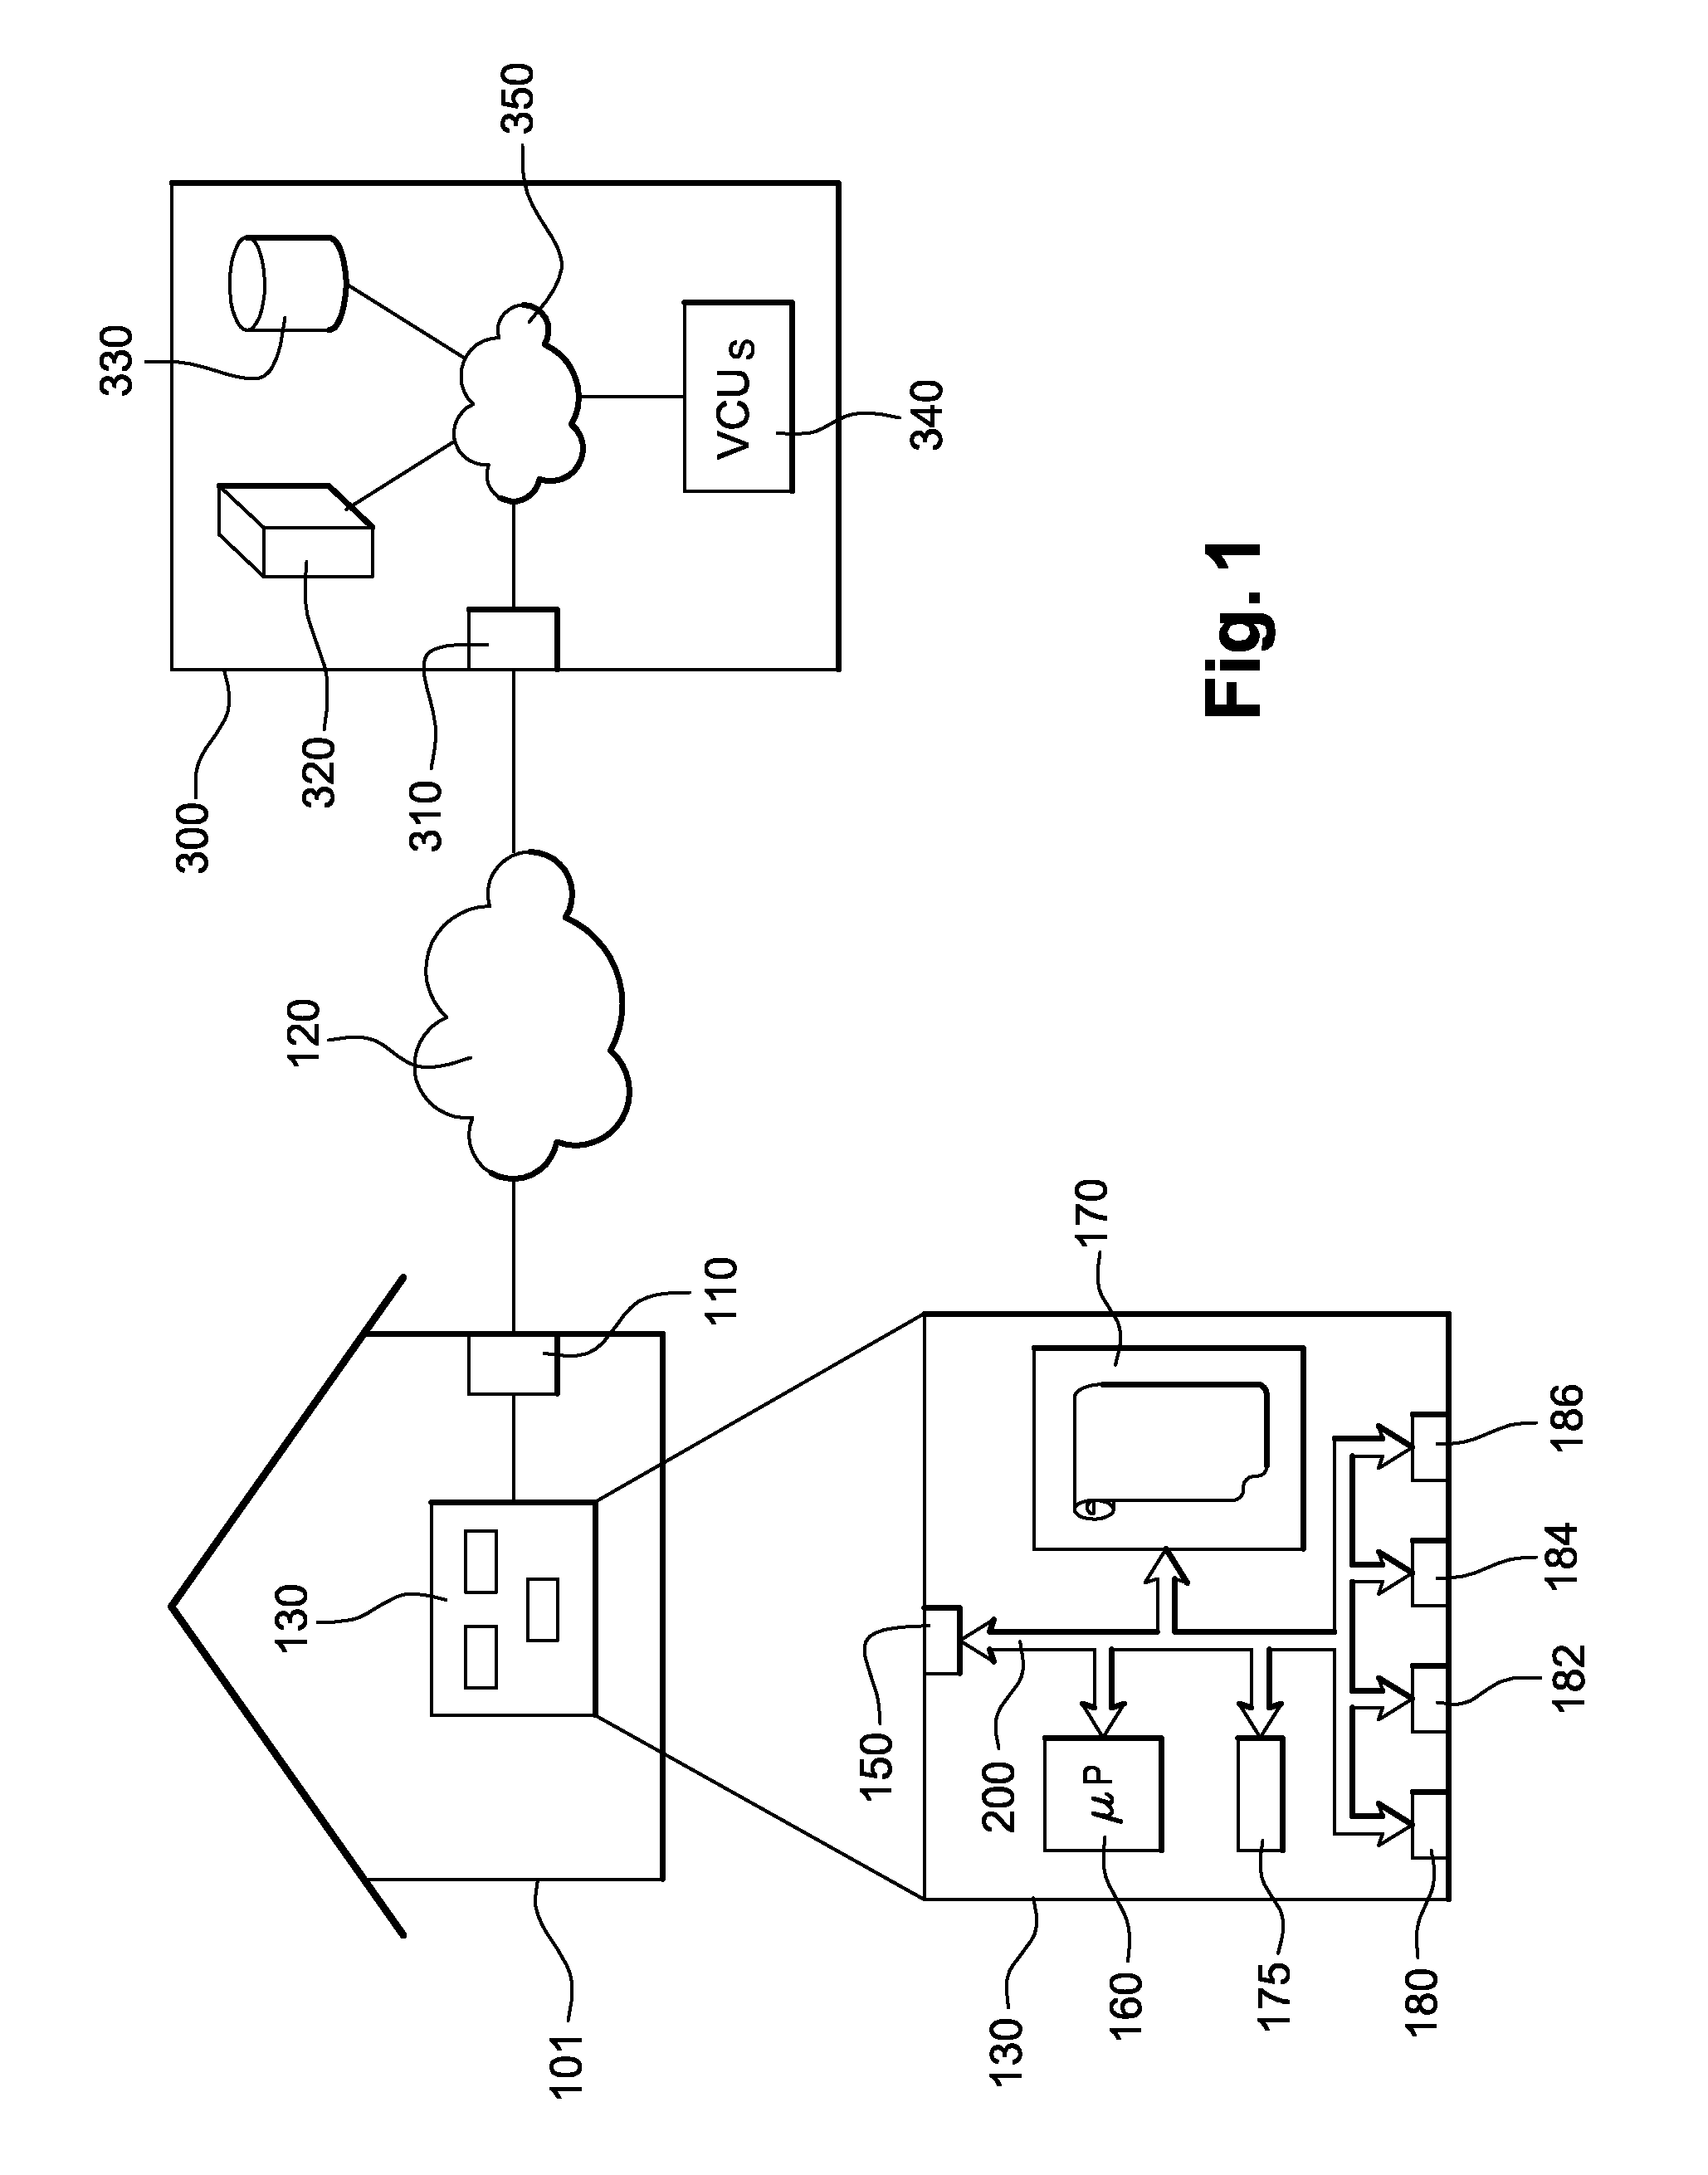 Peripheral Interface for Residential laaS